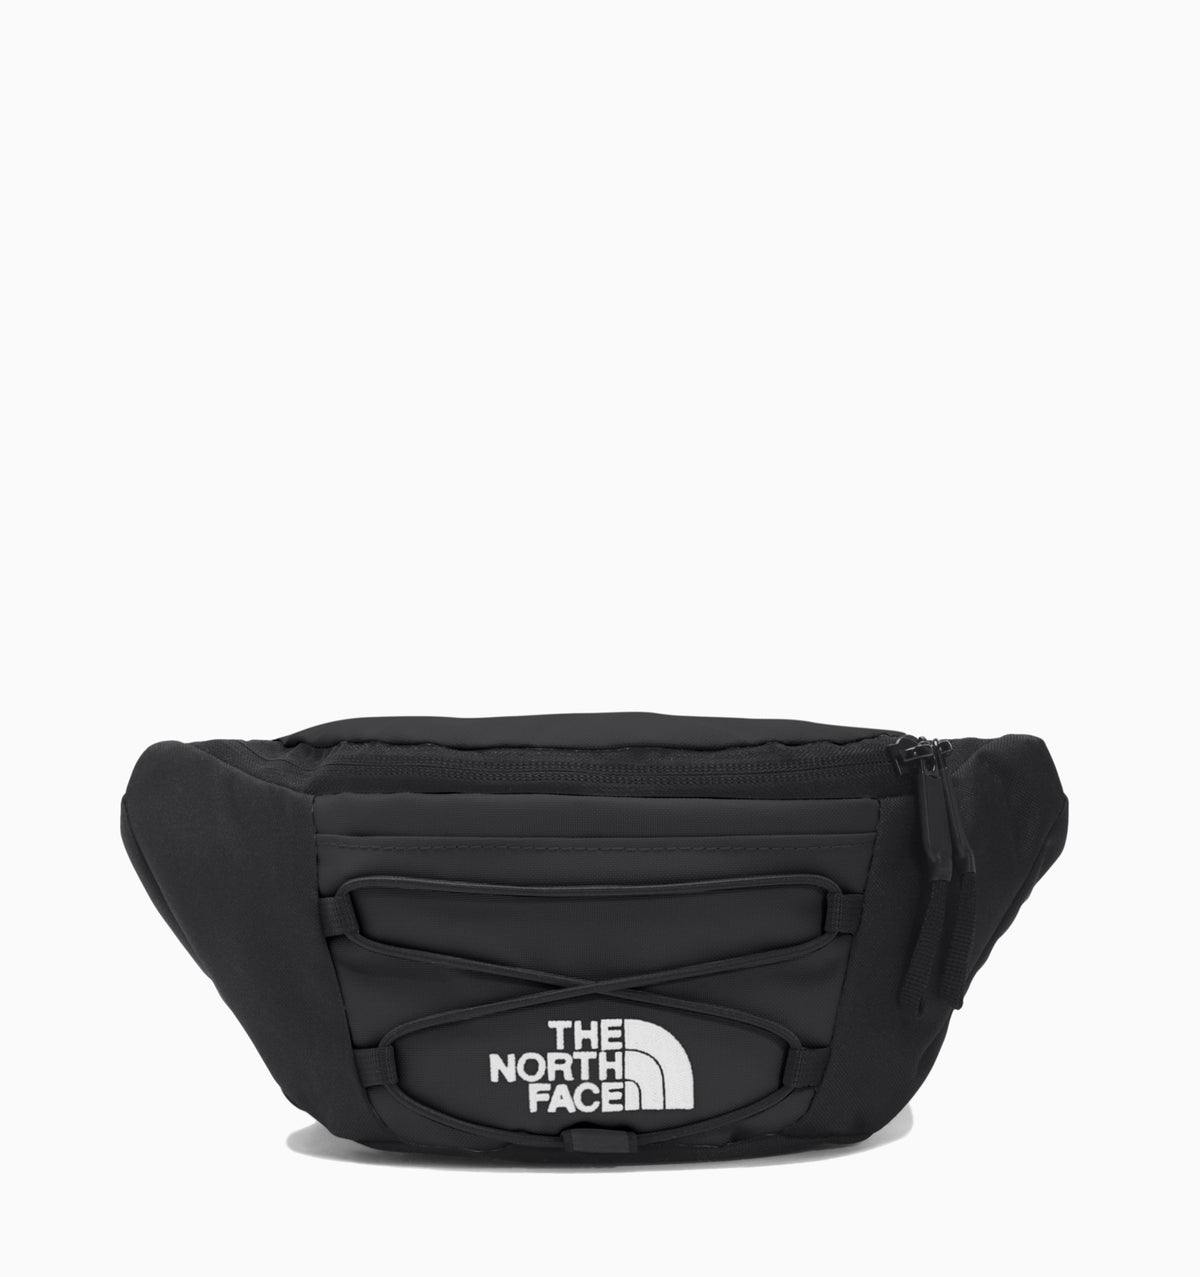 The North Face Jester Lumbar - Black